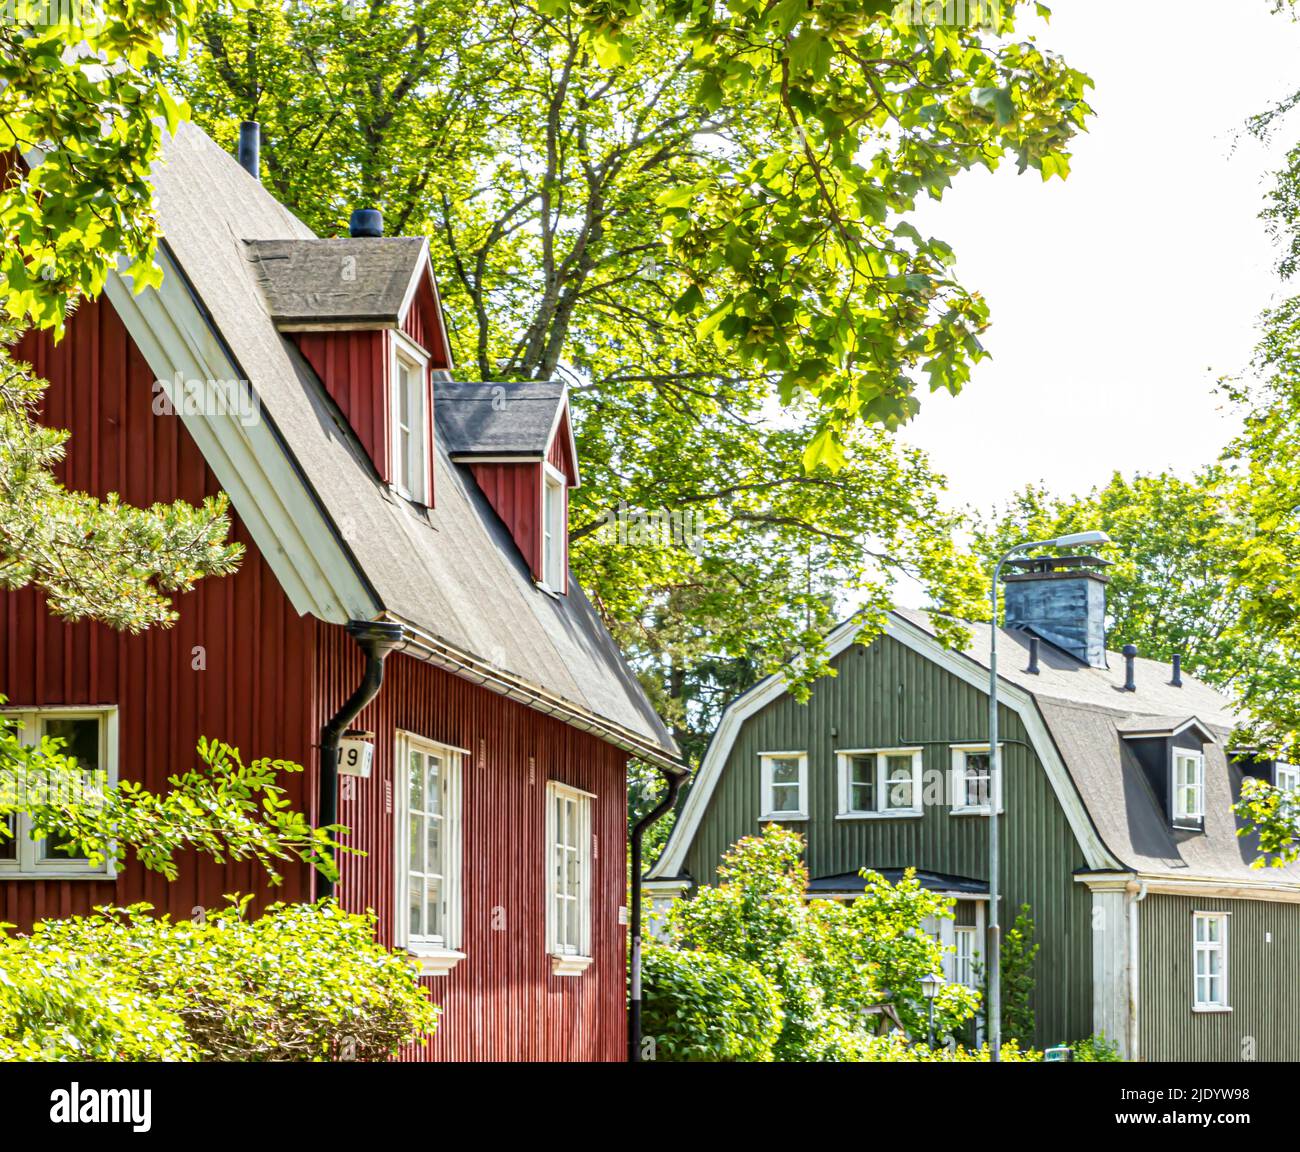 Wooden buildings in Helsinki, Finland on a summer day. Stock Photo